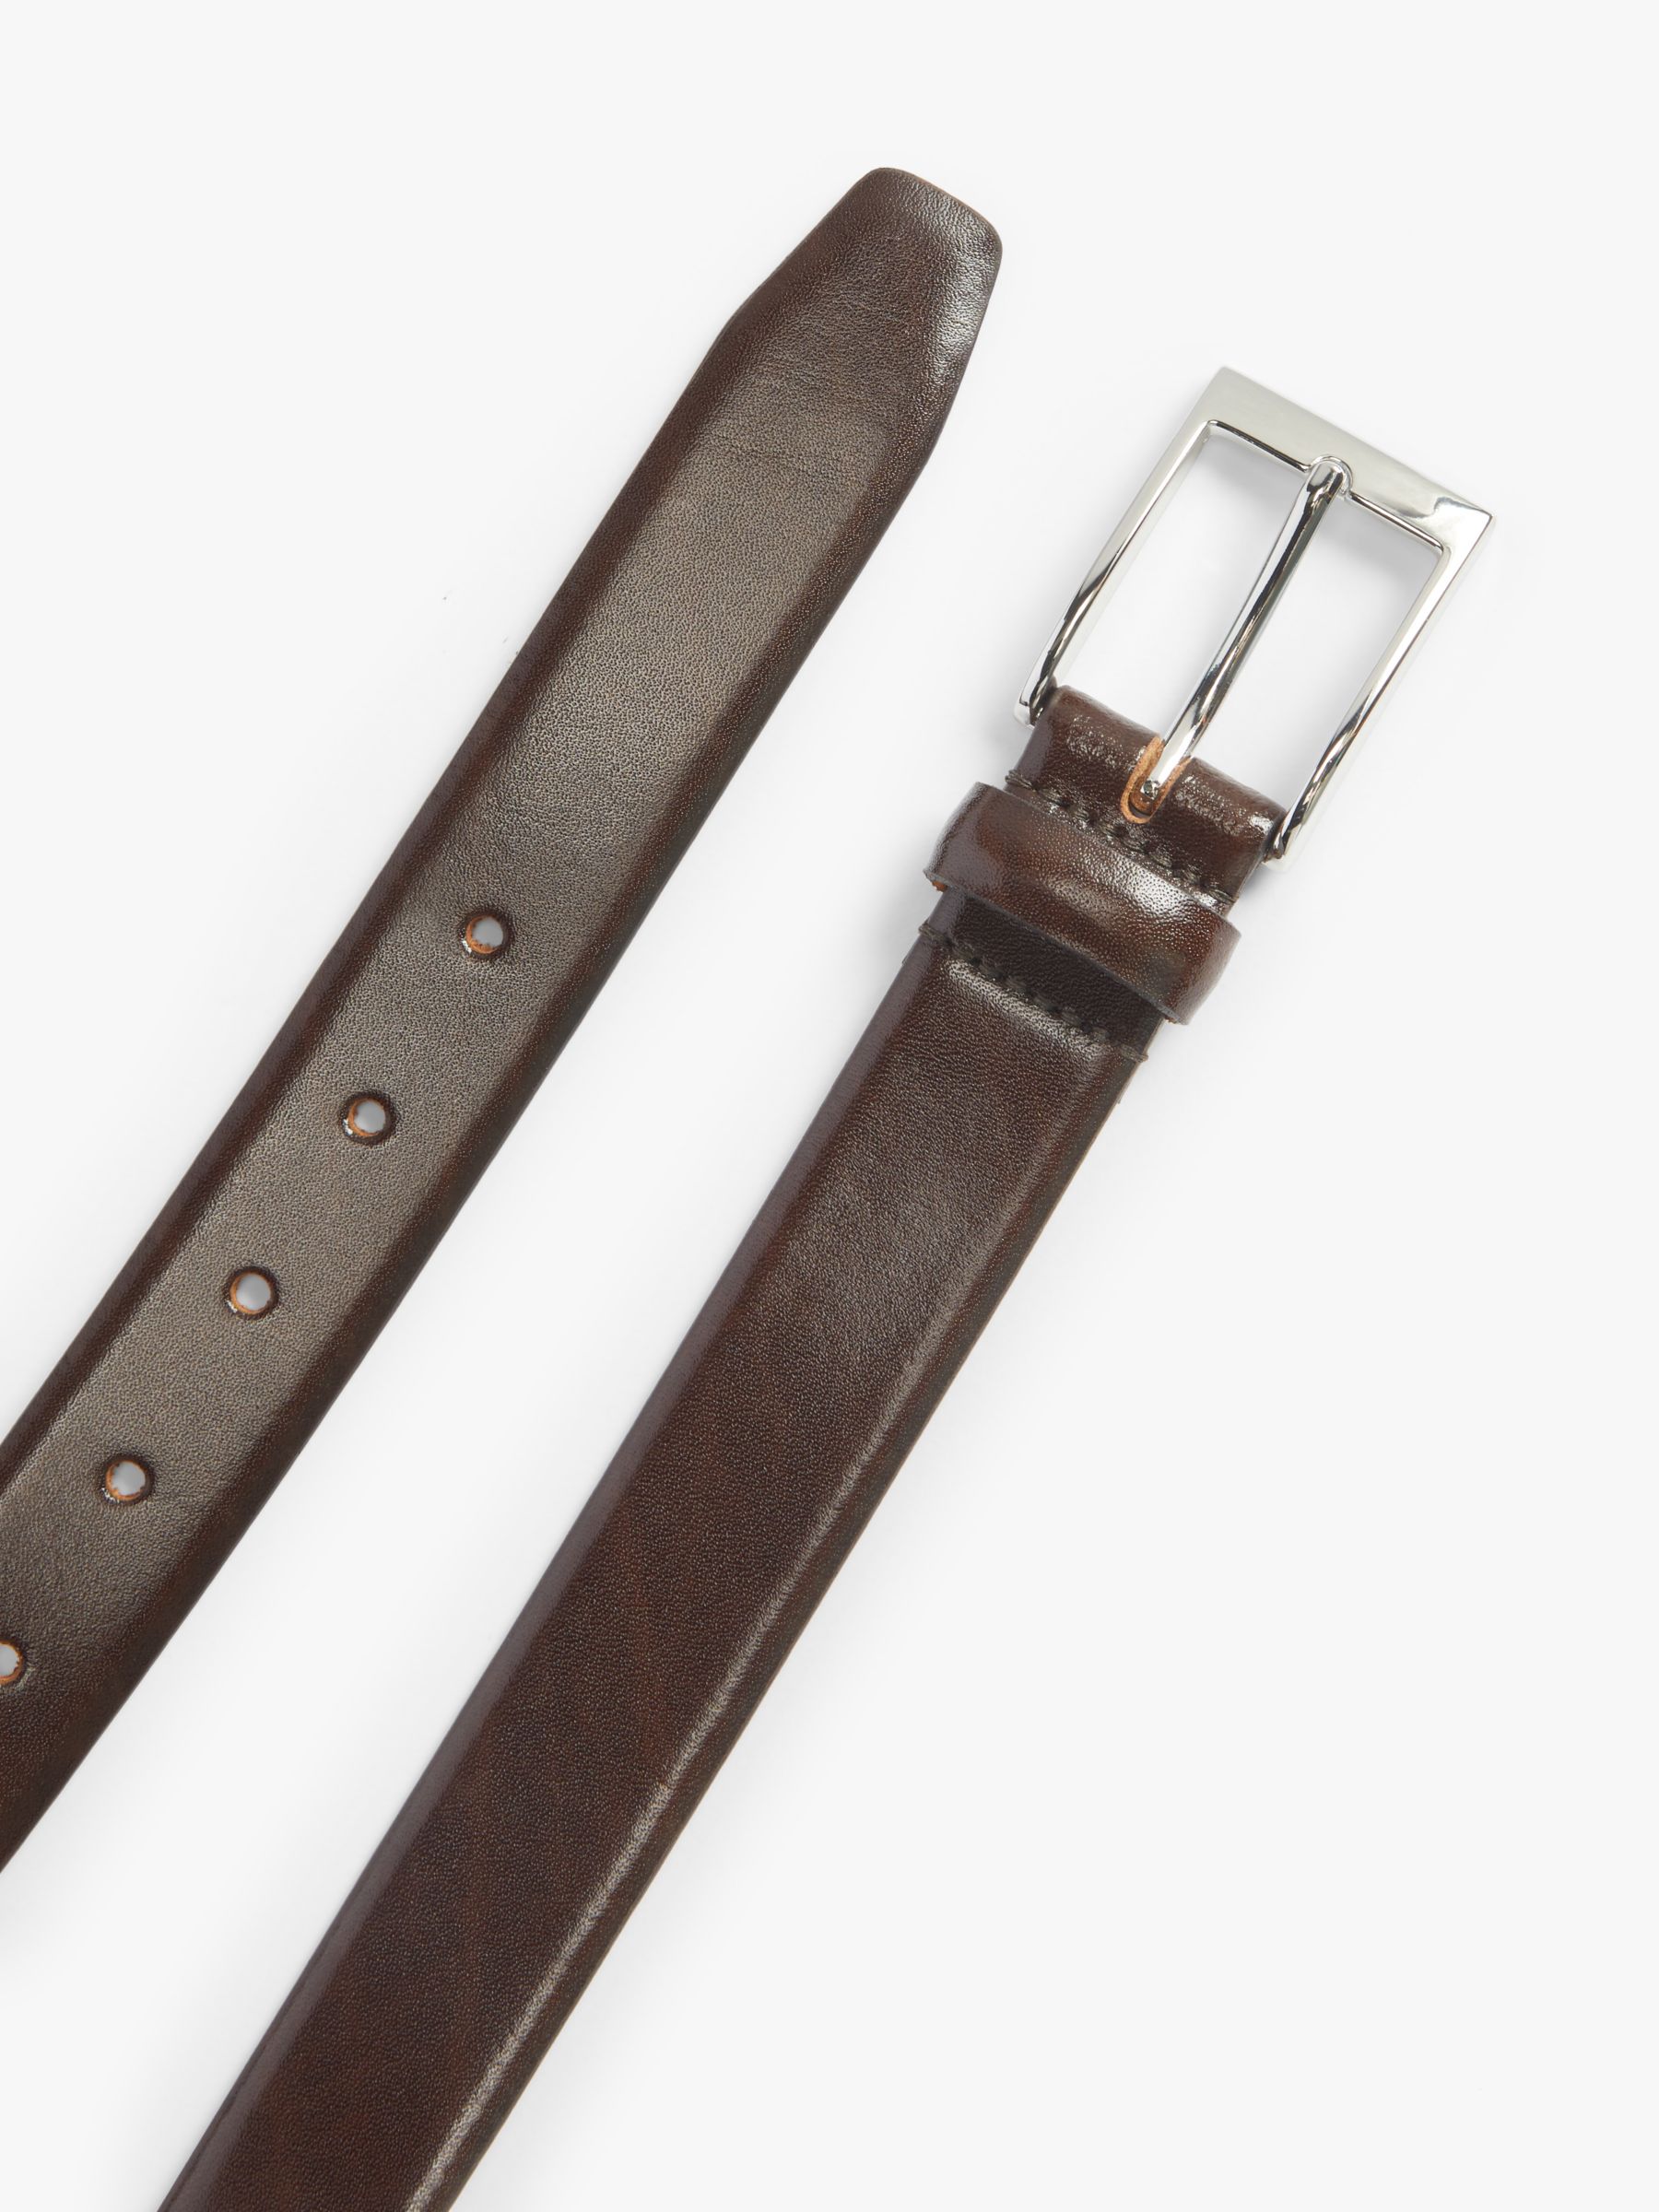 John Lewis Made in England 30mm Formal Leather Belt, Brown, S